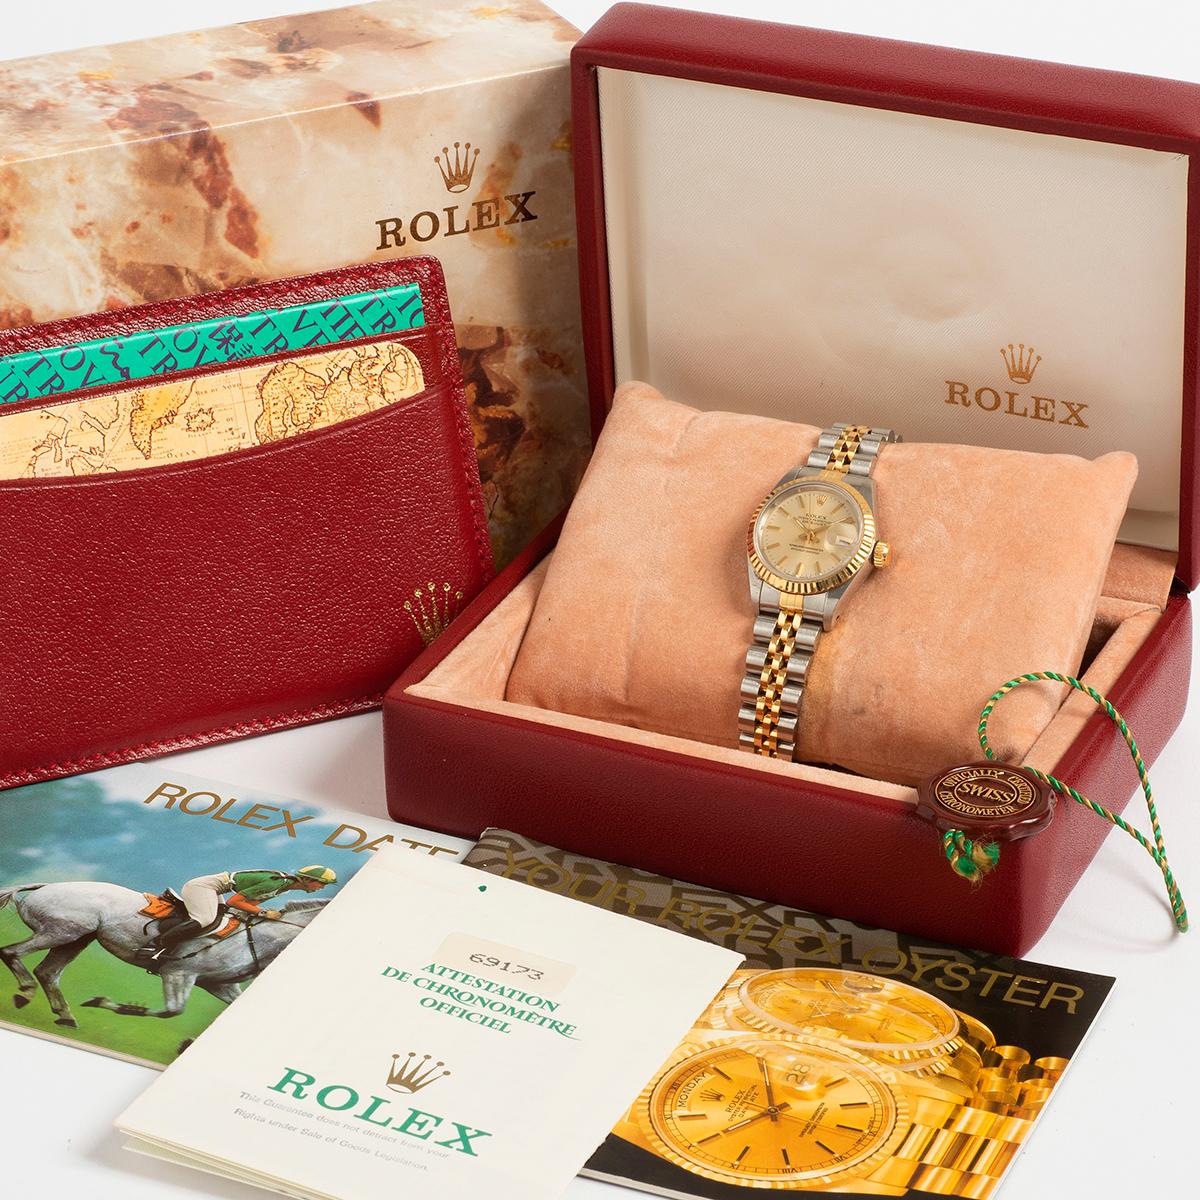 Our Rolex Lady Datejust reference 69173 features the classical combination of 18k yellow gold and stainless steel 26mm case with 18k yellow gold and stainless steel jubilee bracelet and also features an attractive champagne dial. This Lady Datejust